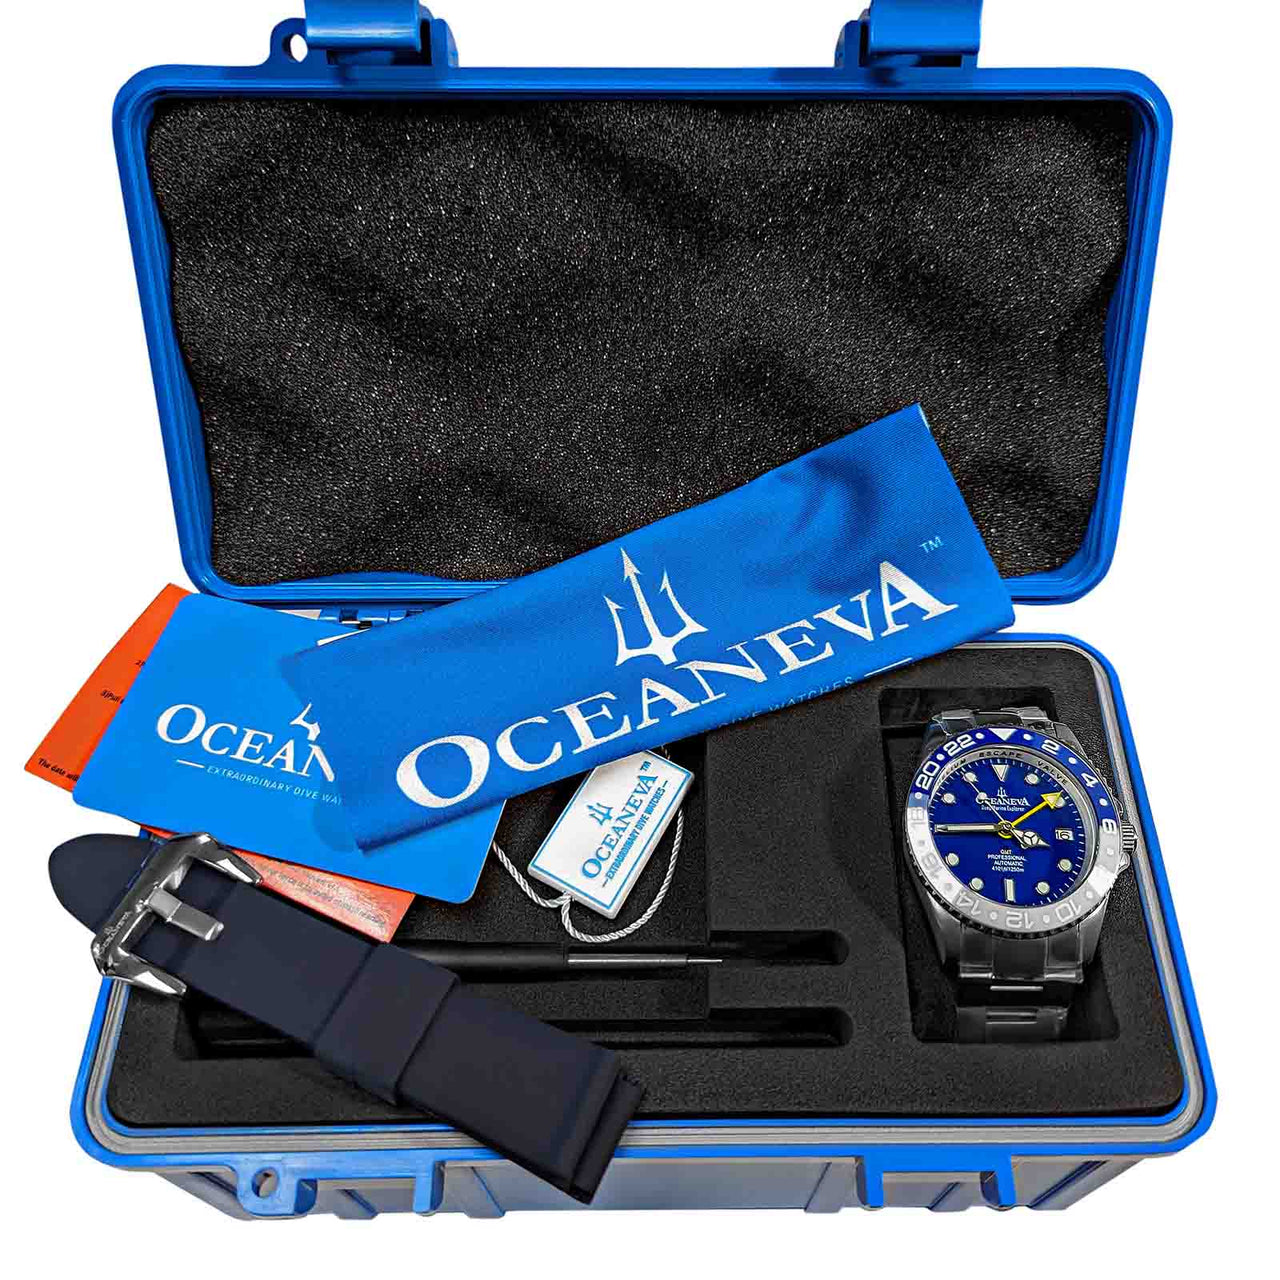 Luxurious unboxing of Oceaneva GMT Titanium Automatic Watch with accessories